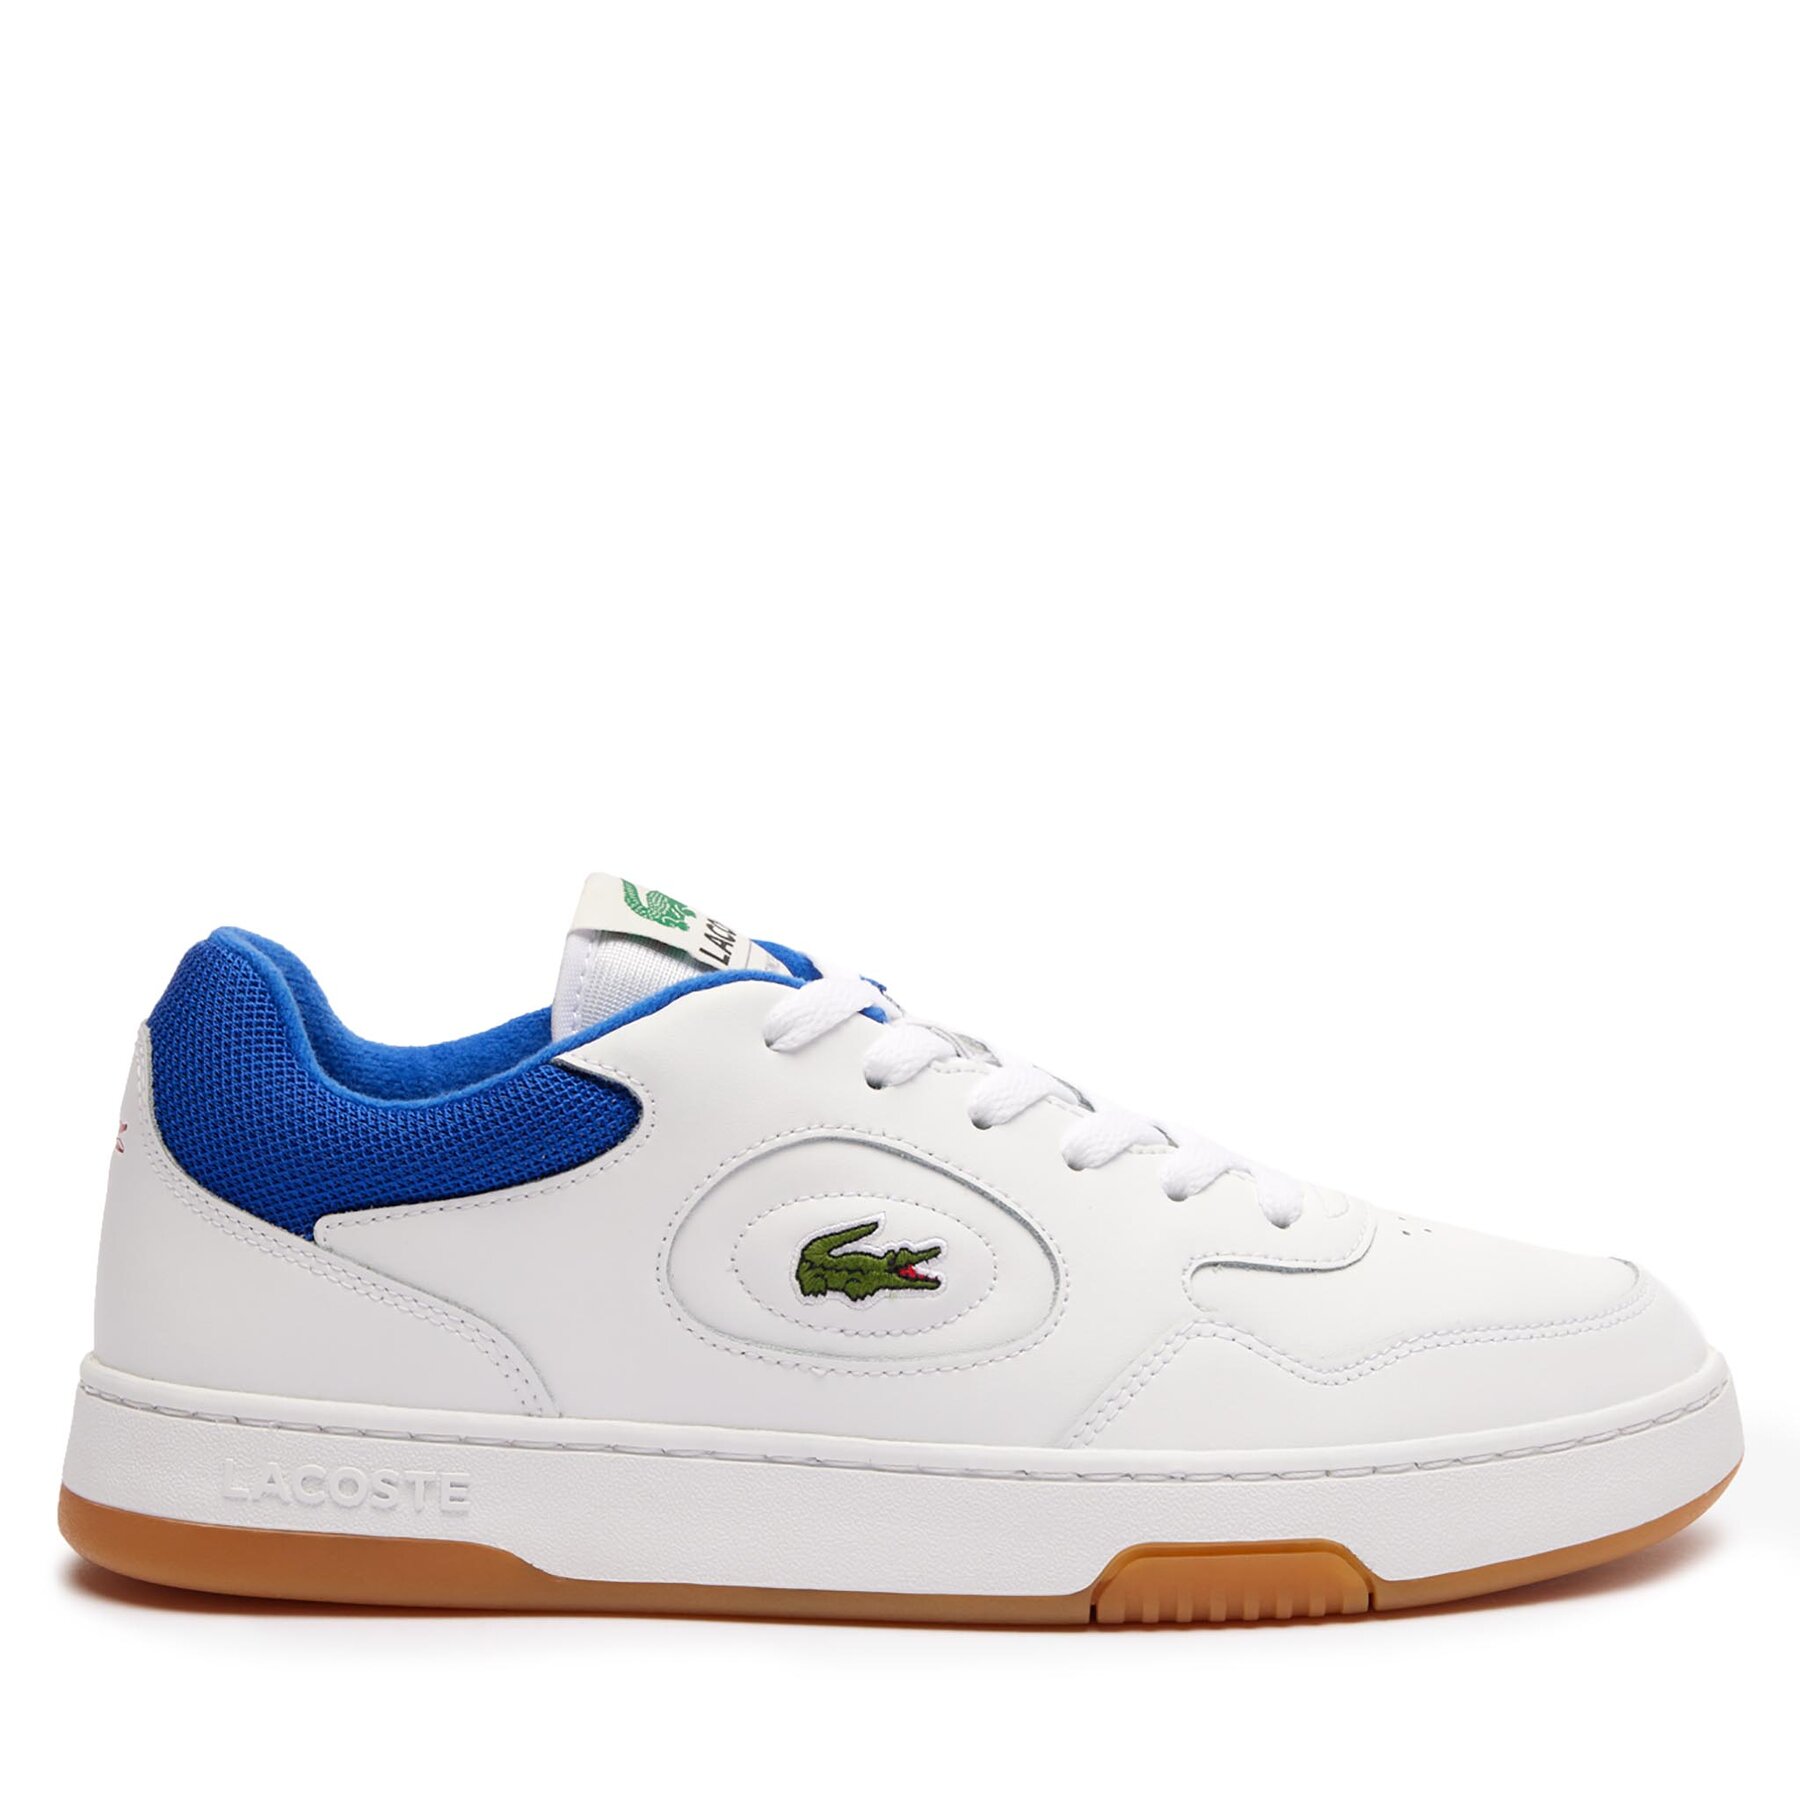 Sneakers Lacoste Lineset Contrasted Collar 747SMA0060 Wht/Red/Blu 5T9 von Lacoste